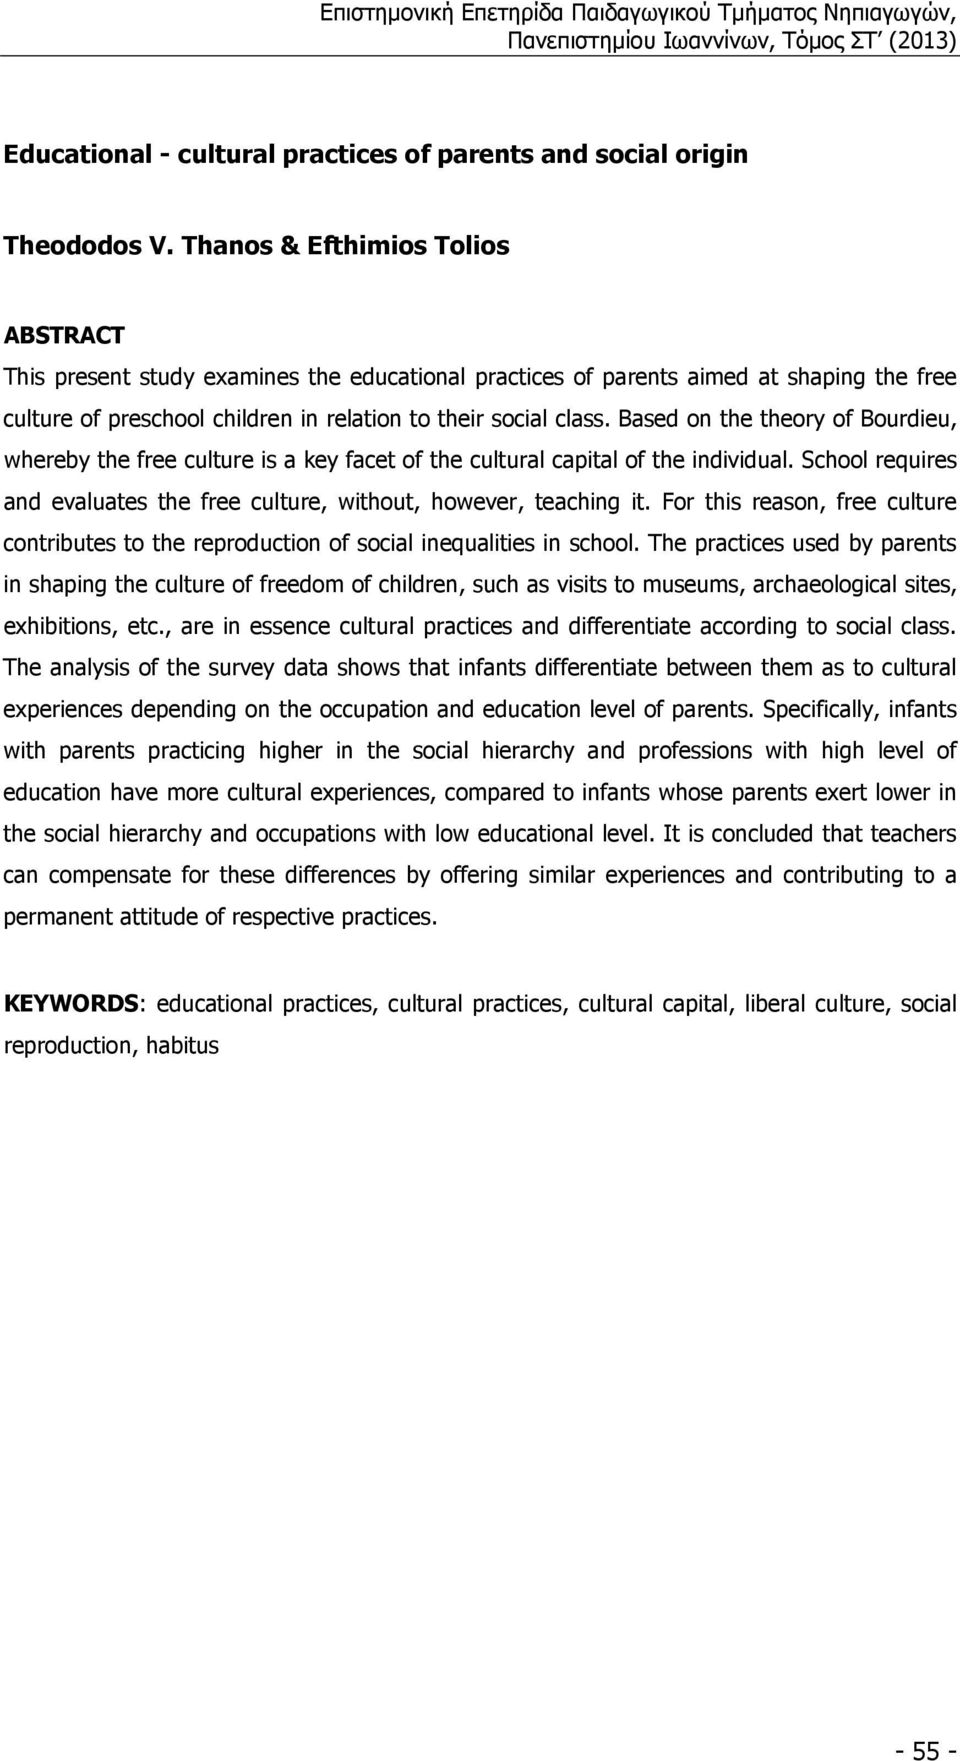 Based on the theory of Bourdieu, whereby the free culture is a key facet of the cultural capital of the individual. School requires and evaluates the free culture, without, however, teaching it.